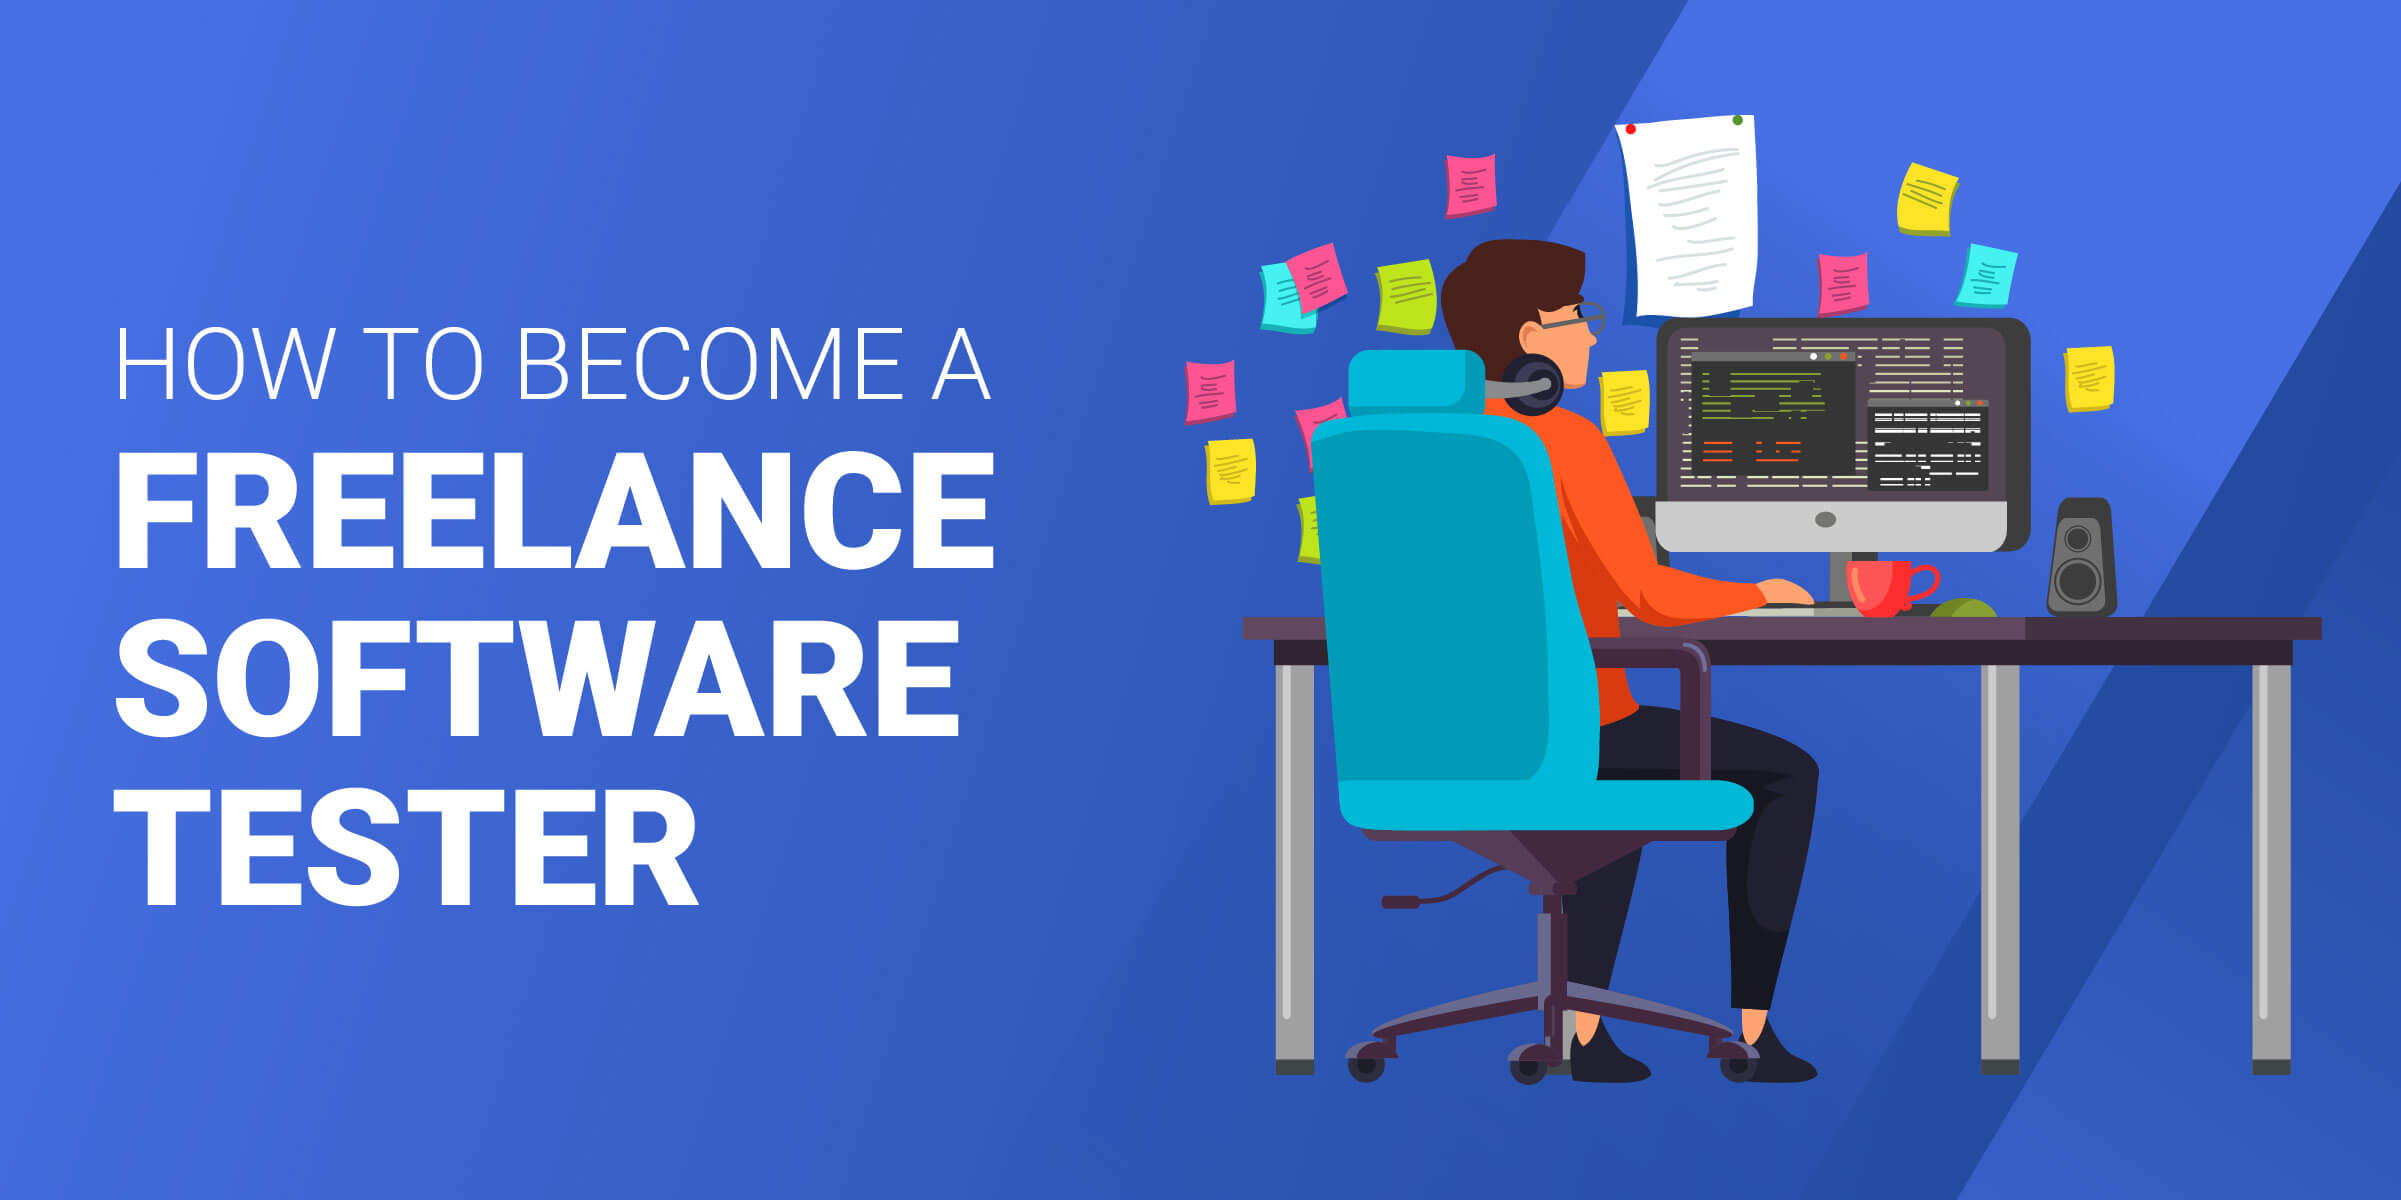 How to Become Freelance Software Tester